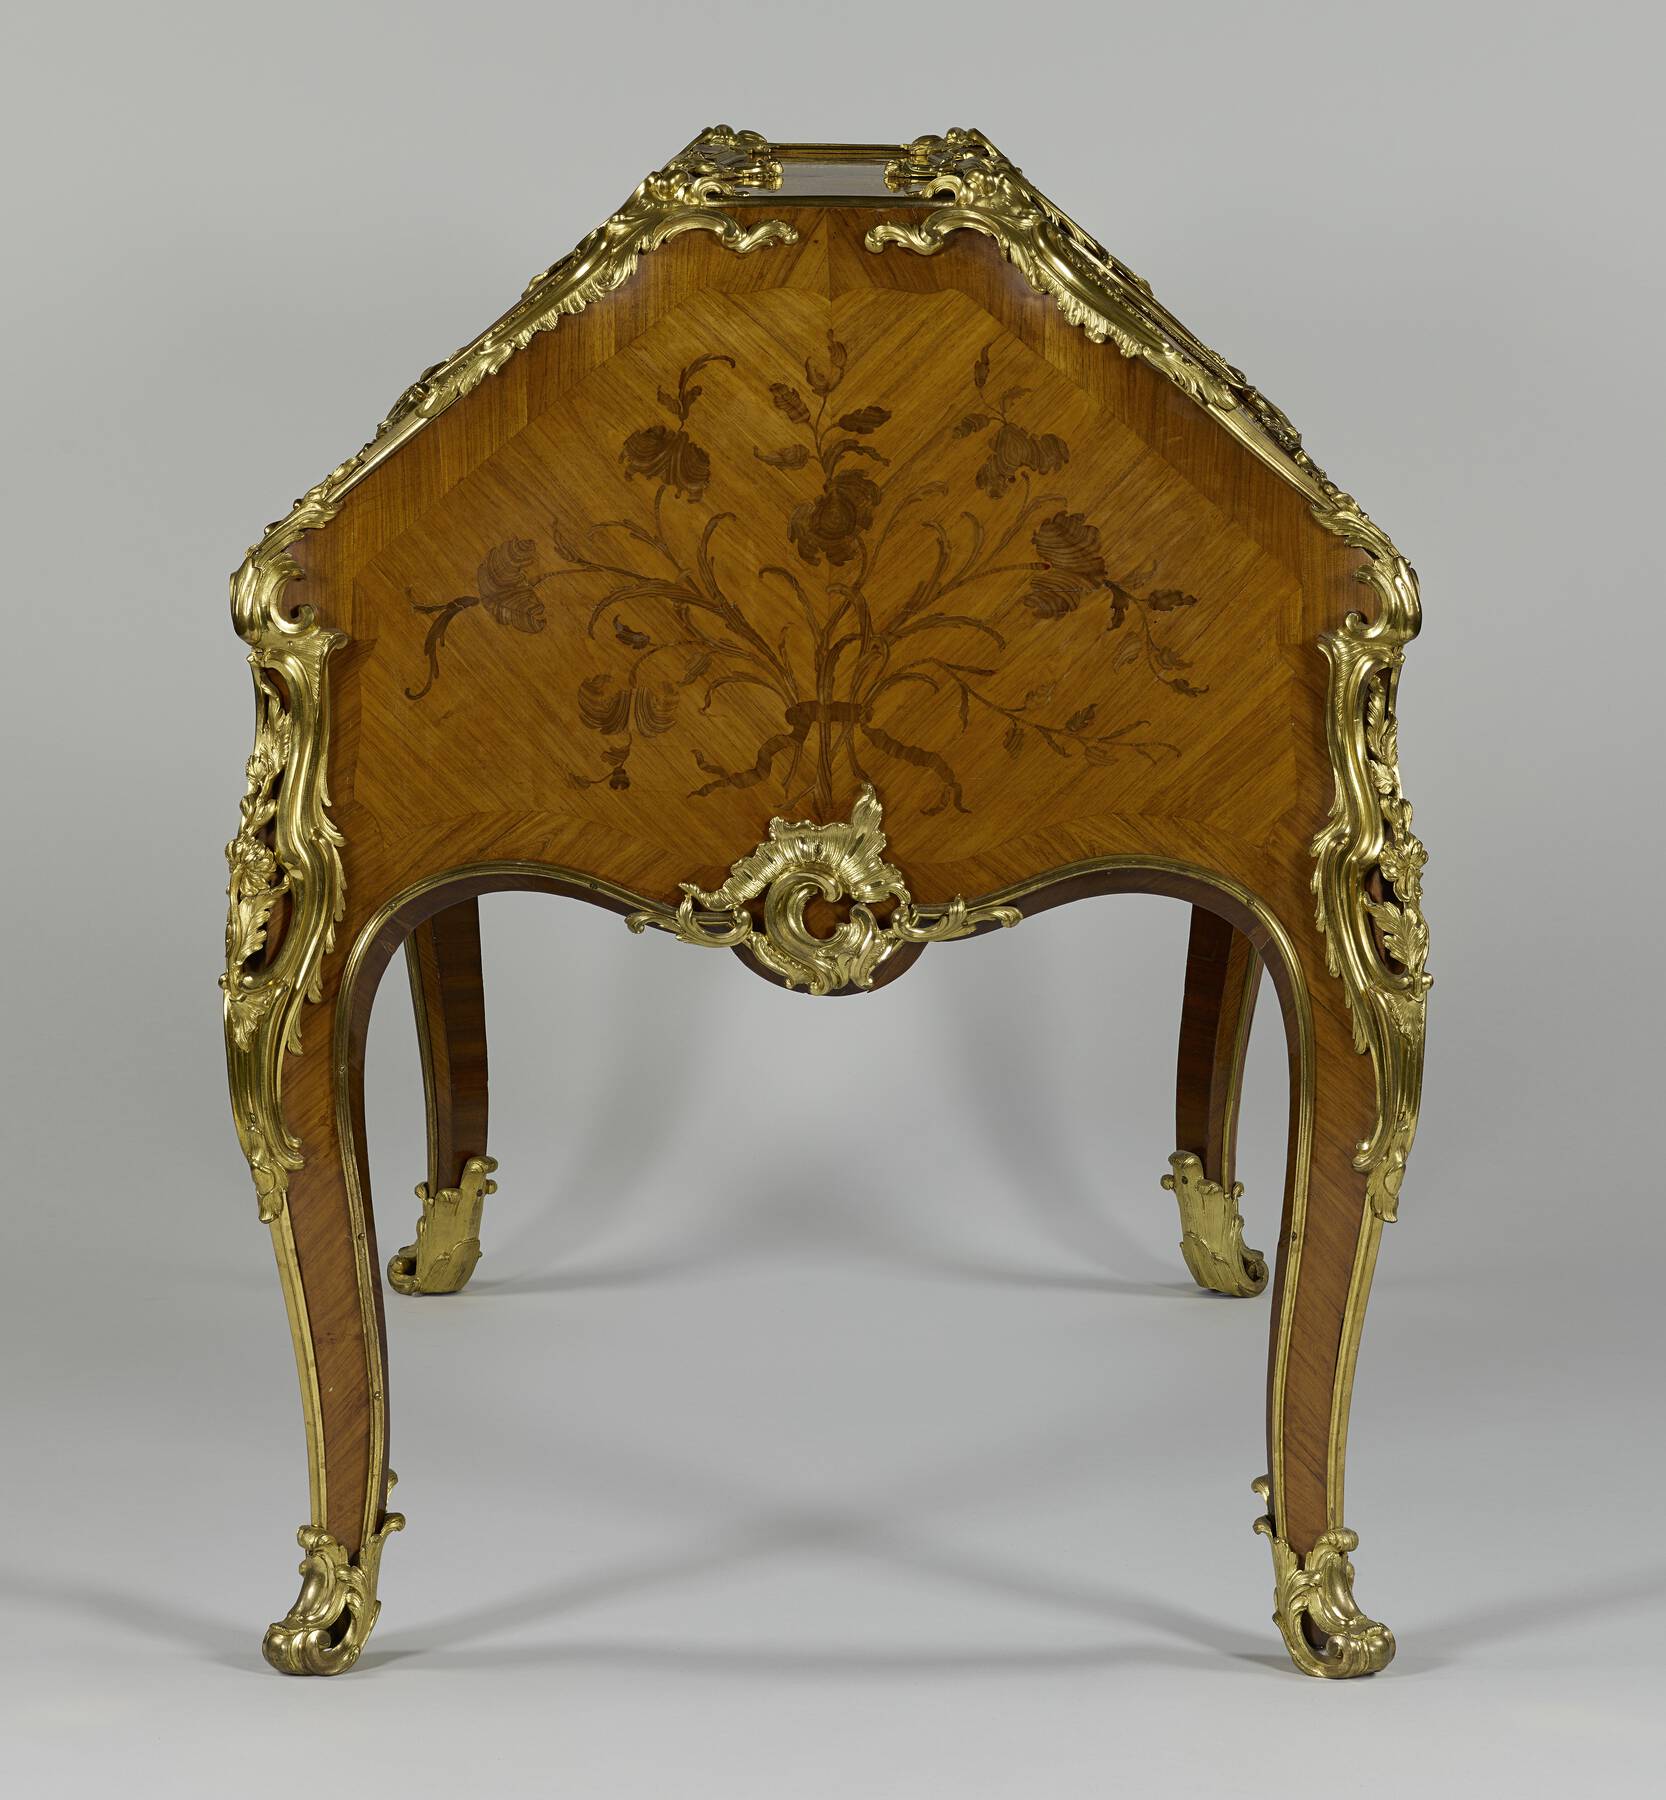 side view of the desk, showing the floral marquetry and gilt bronze mounts